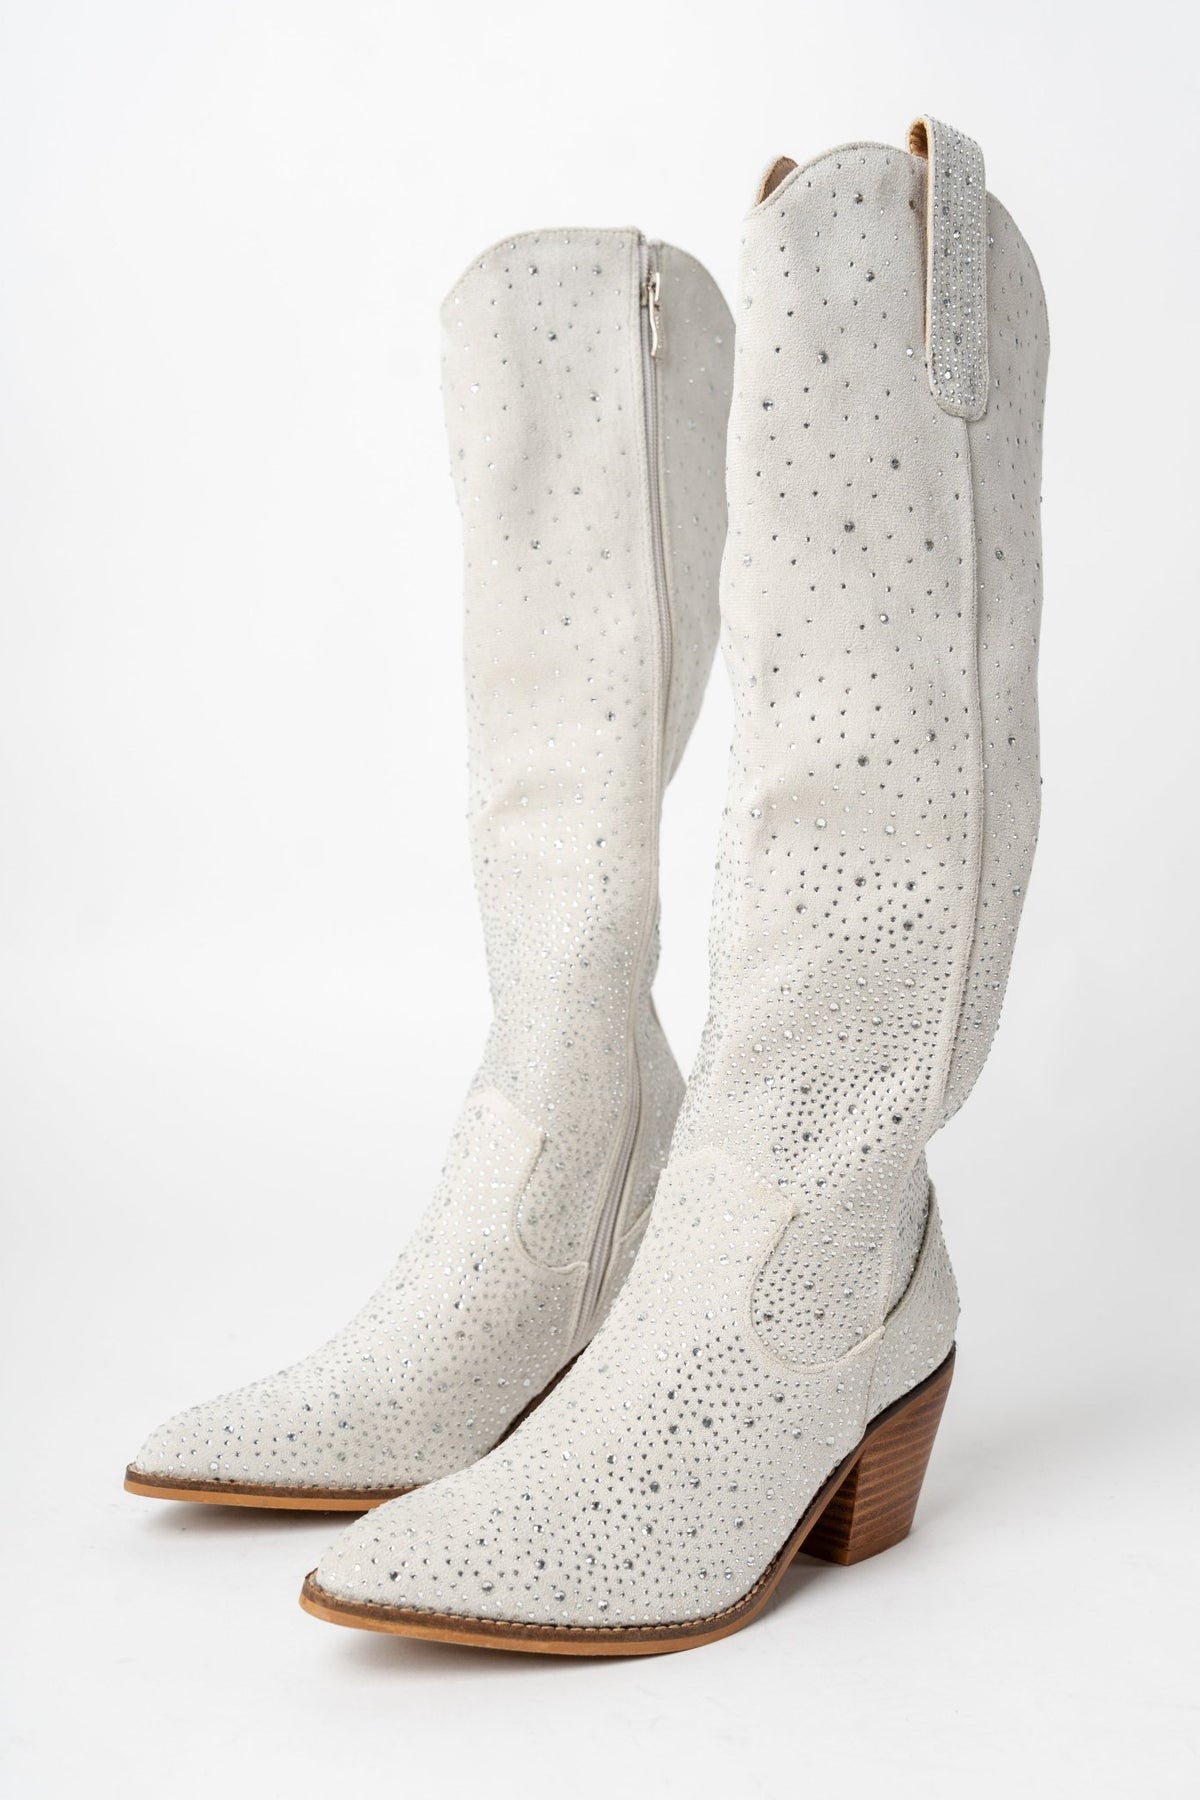 Shine rhinestone western boots pearl/silver - Cute shoes - Trendy Shoes at Lush Fashion Lounge Boutique in Oklahoma City